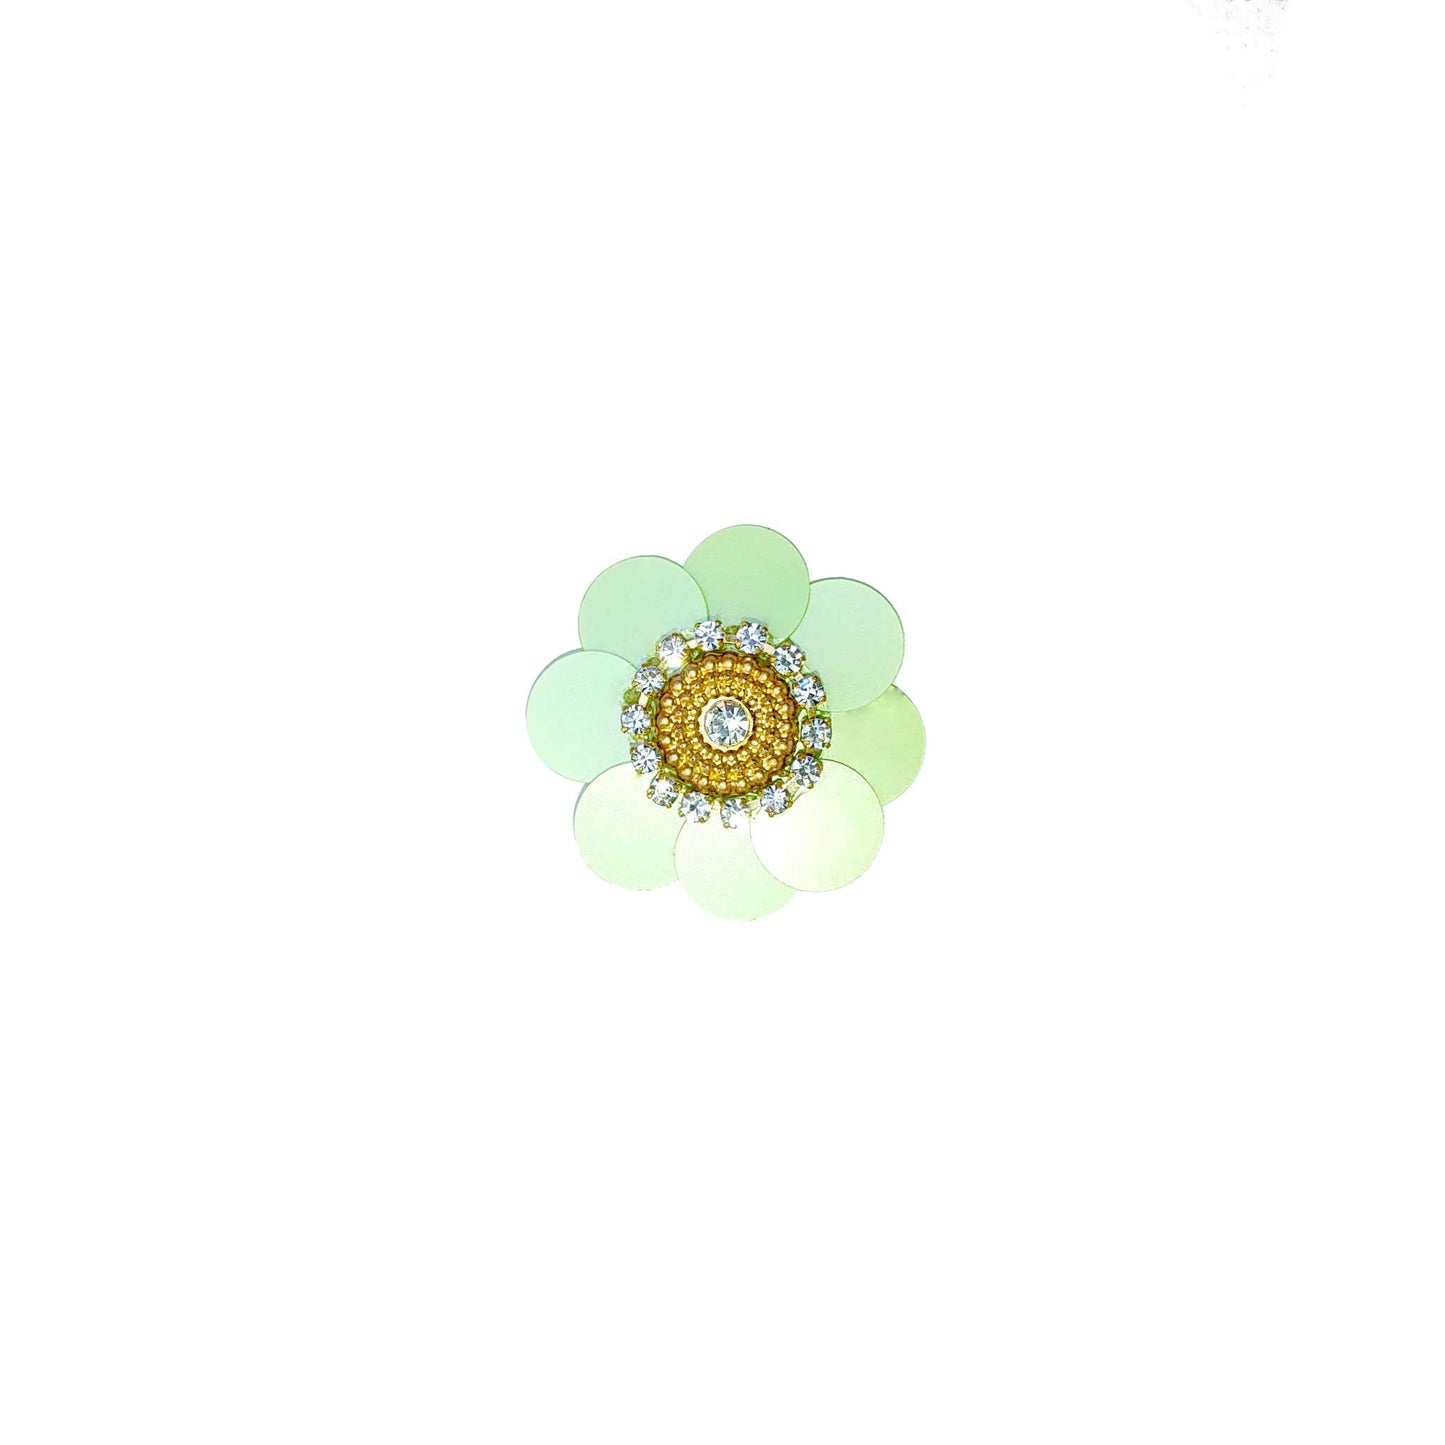 Indian Petals Sequence work Floral Buti for DIY Craft, Trouseau Packing or Decoration (Bunch of 12) - Design 206, Light Green - Indian Petals